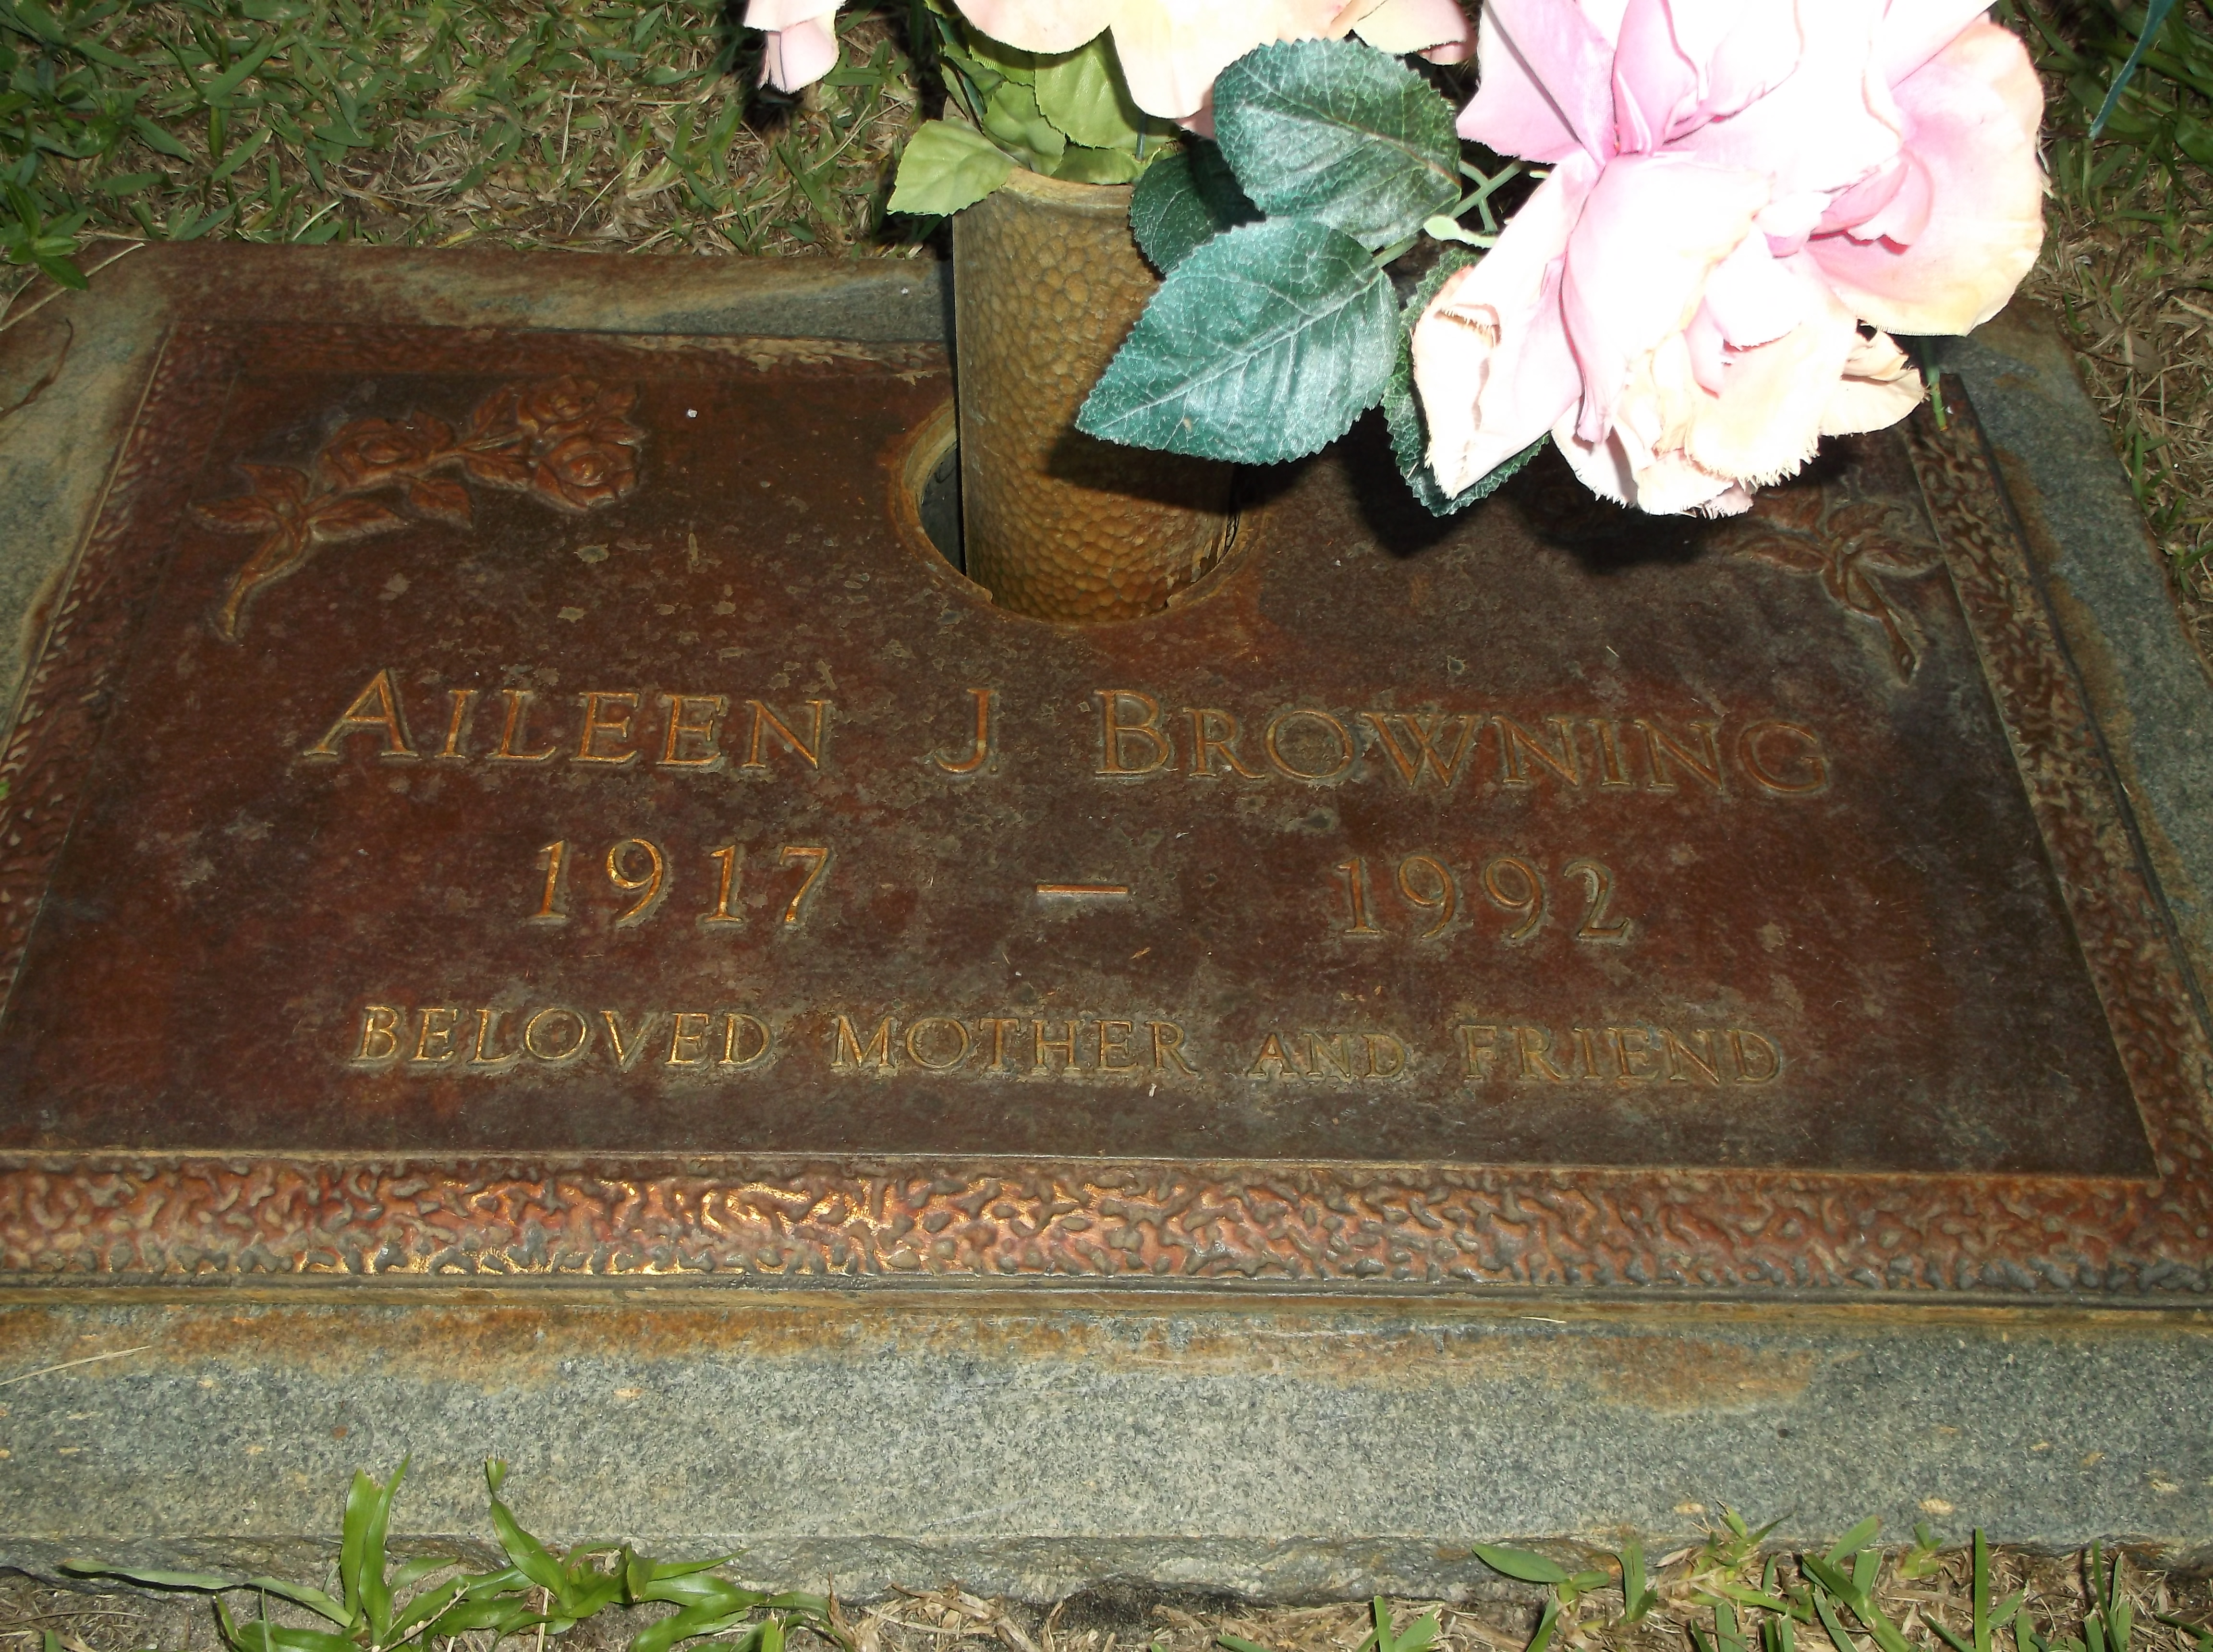 Aileen J Browning